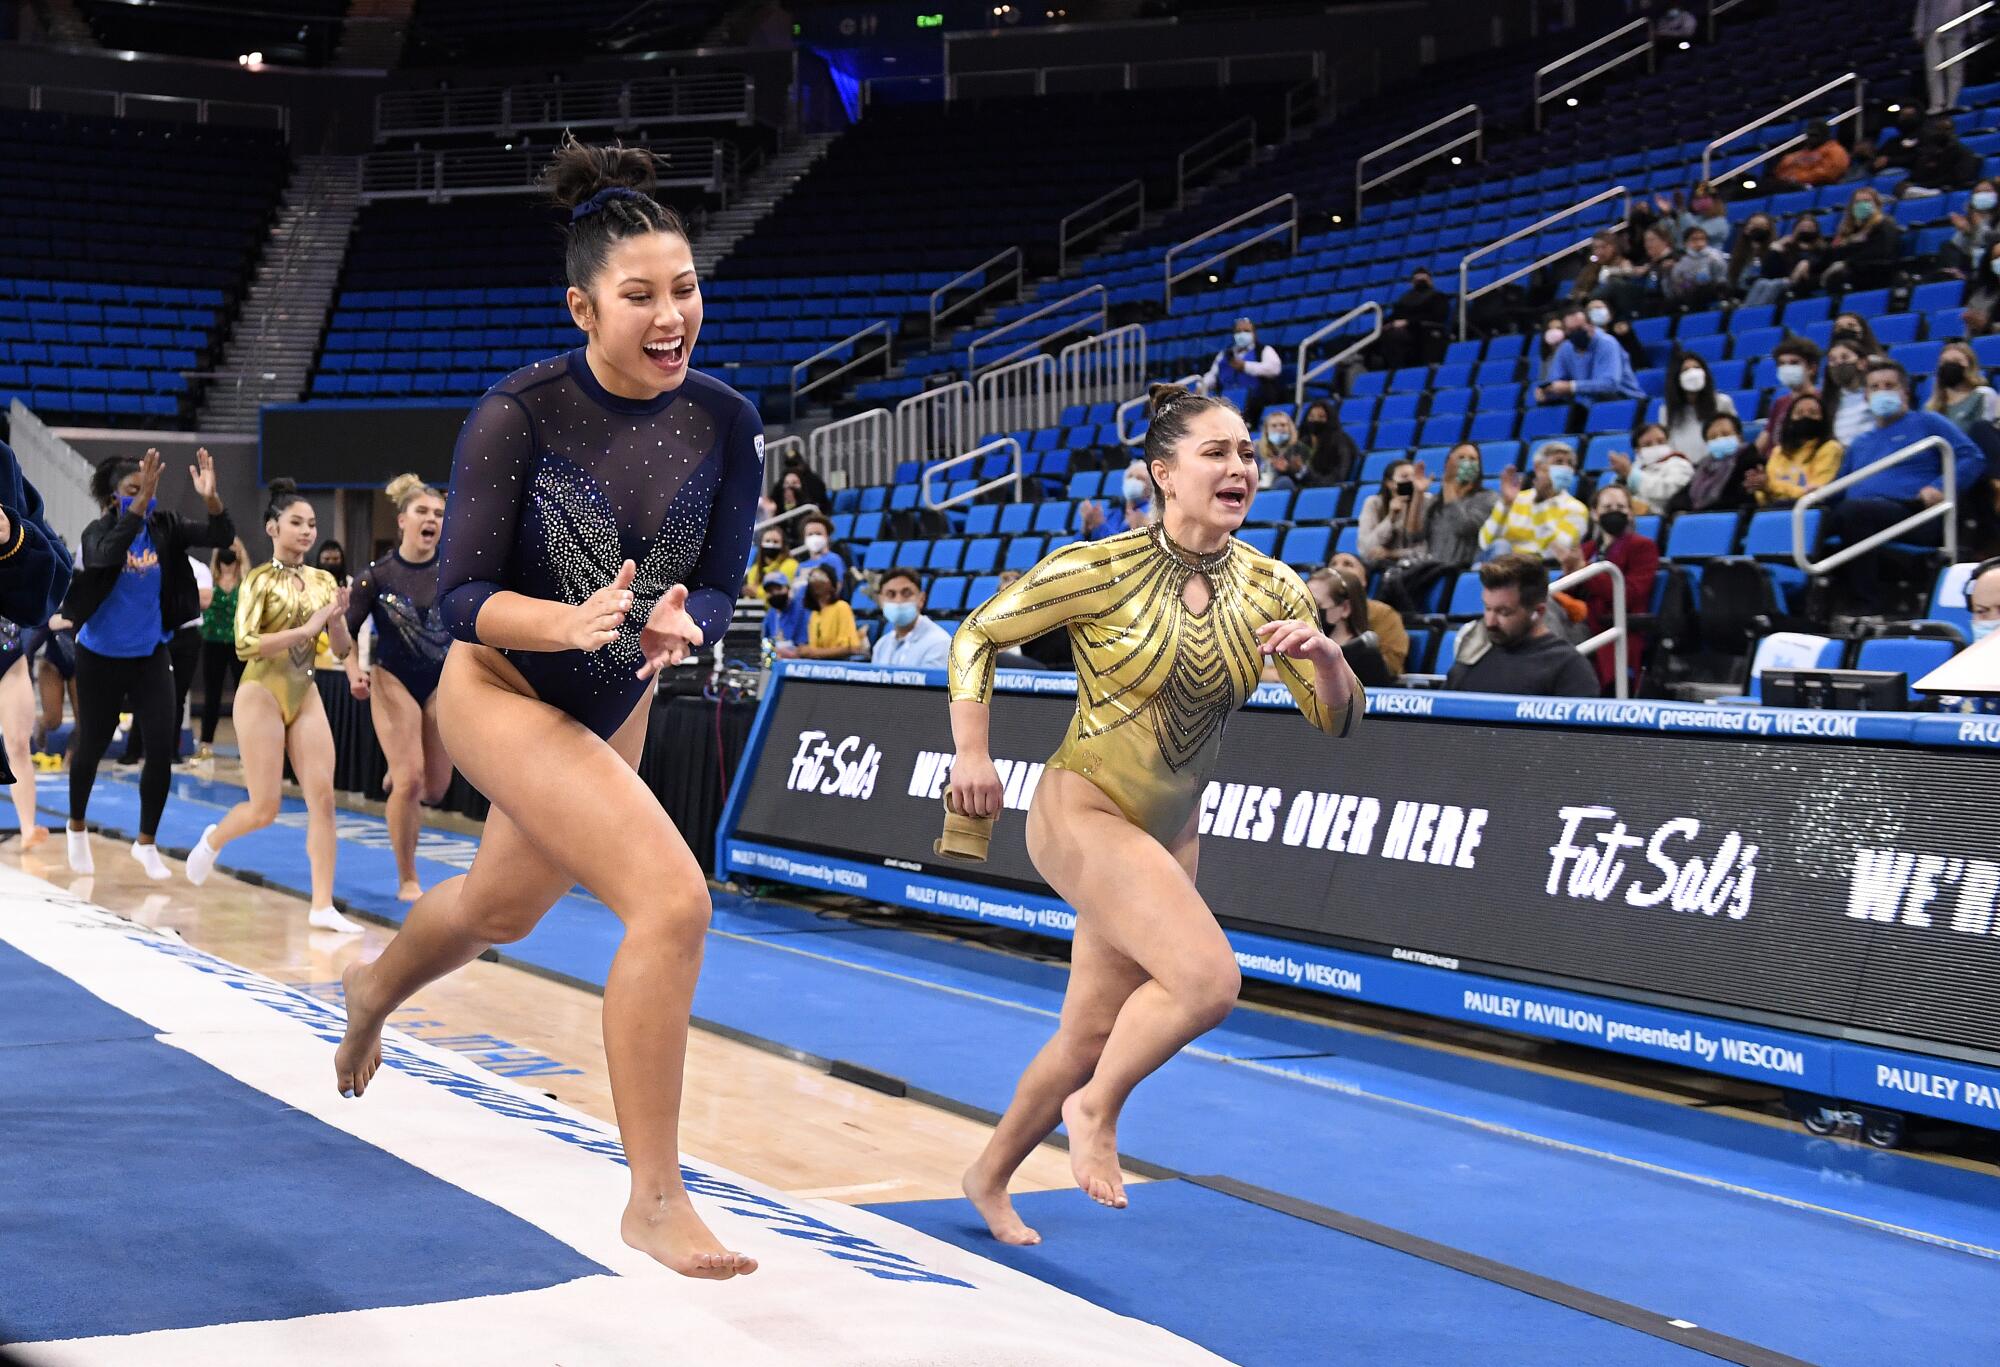 UCLA gymnasts run next to the seating area after competing on the vault.